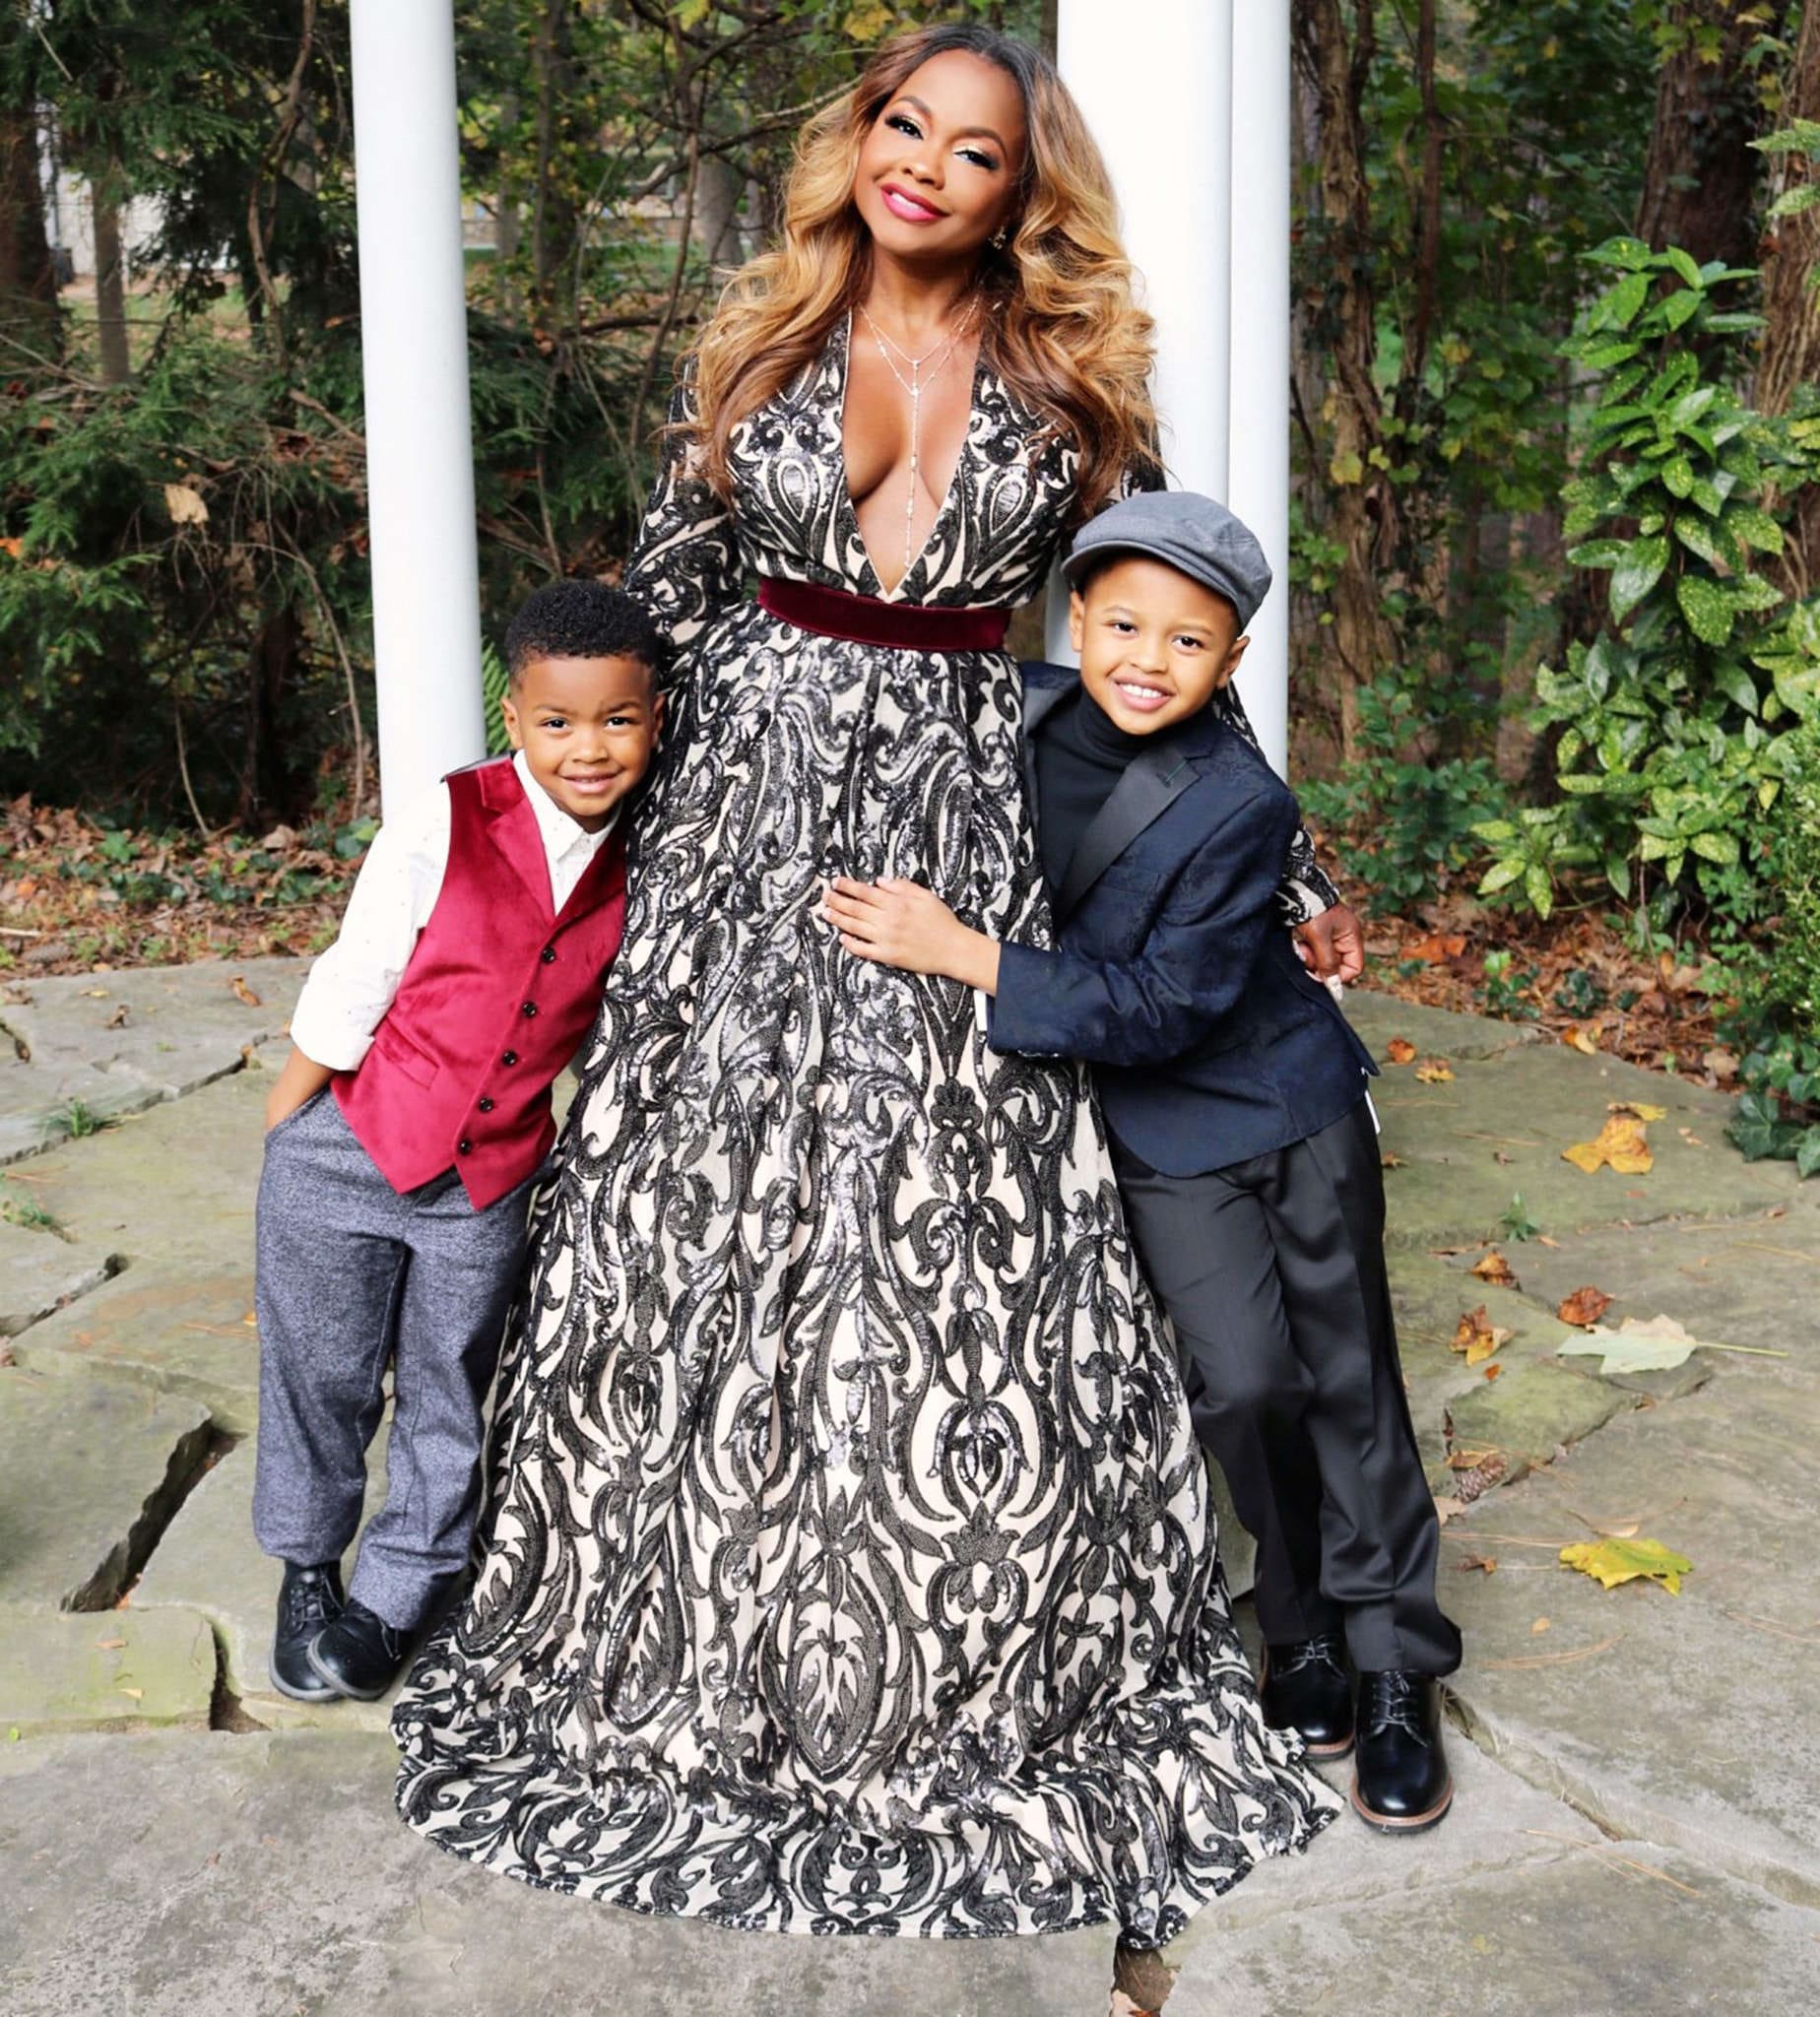 Phaedra Parks Opens The Door Of Her Mansion To Show Her Holiday Decorations - Here's What She Gifted Her Sons